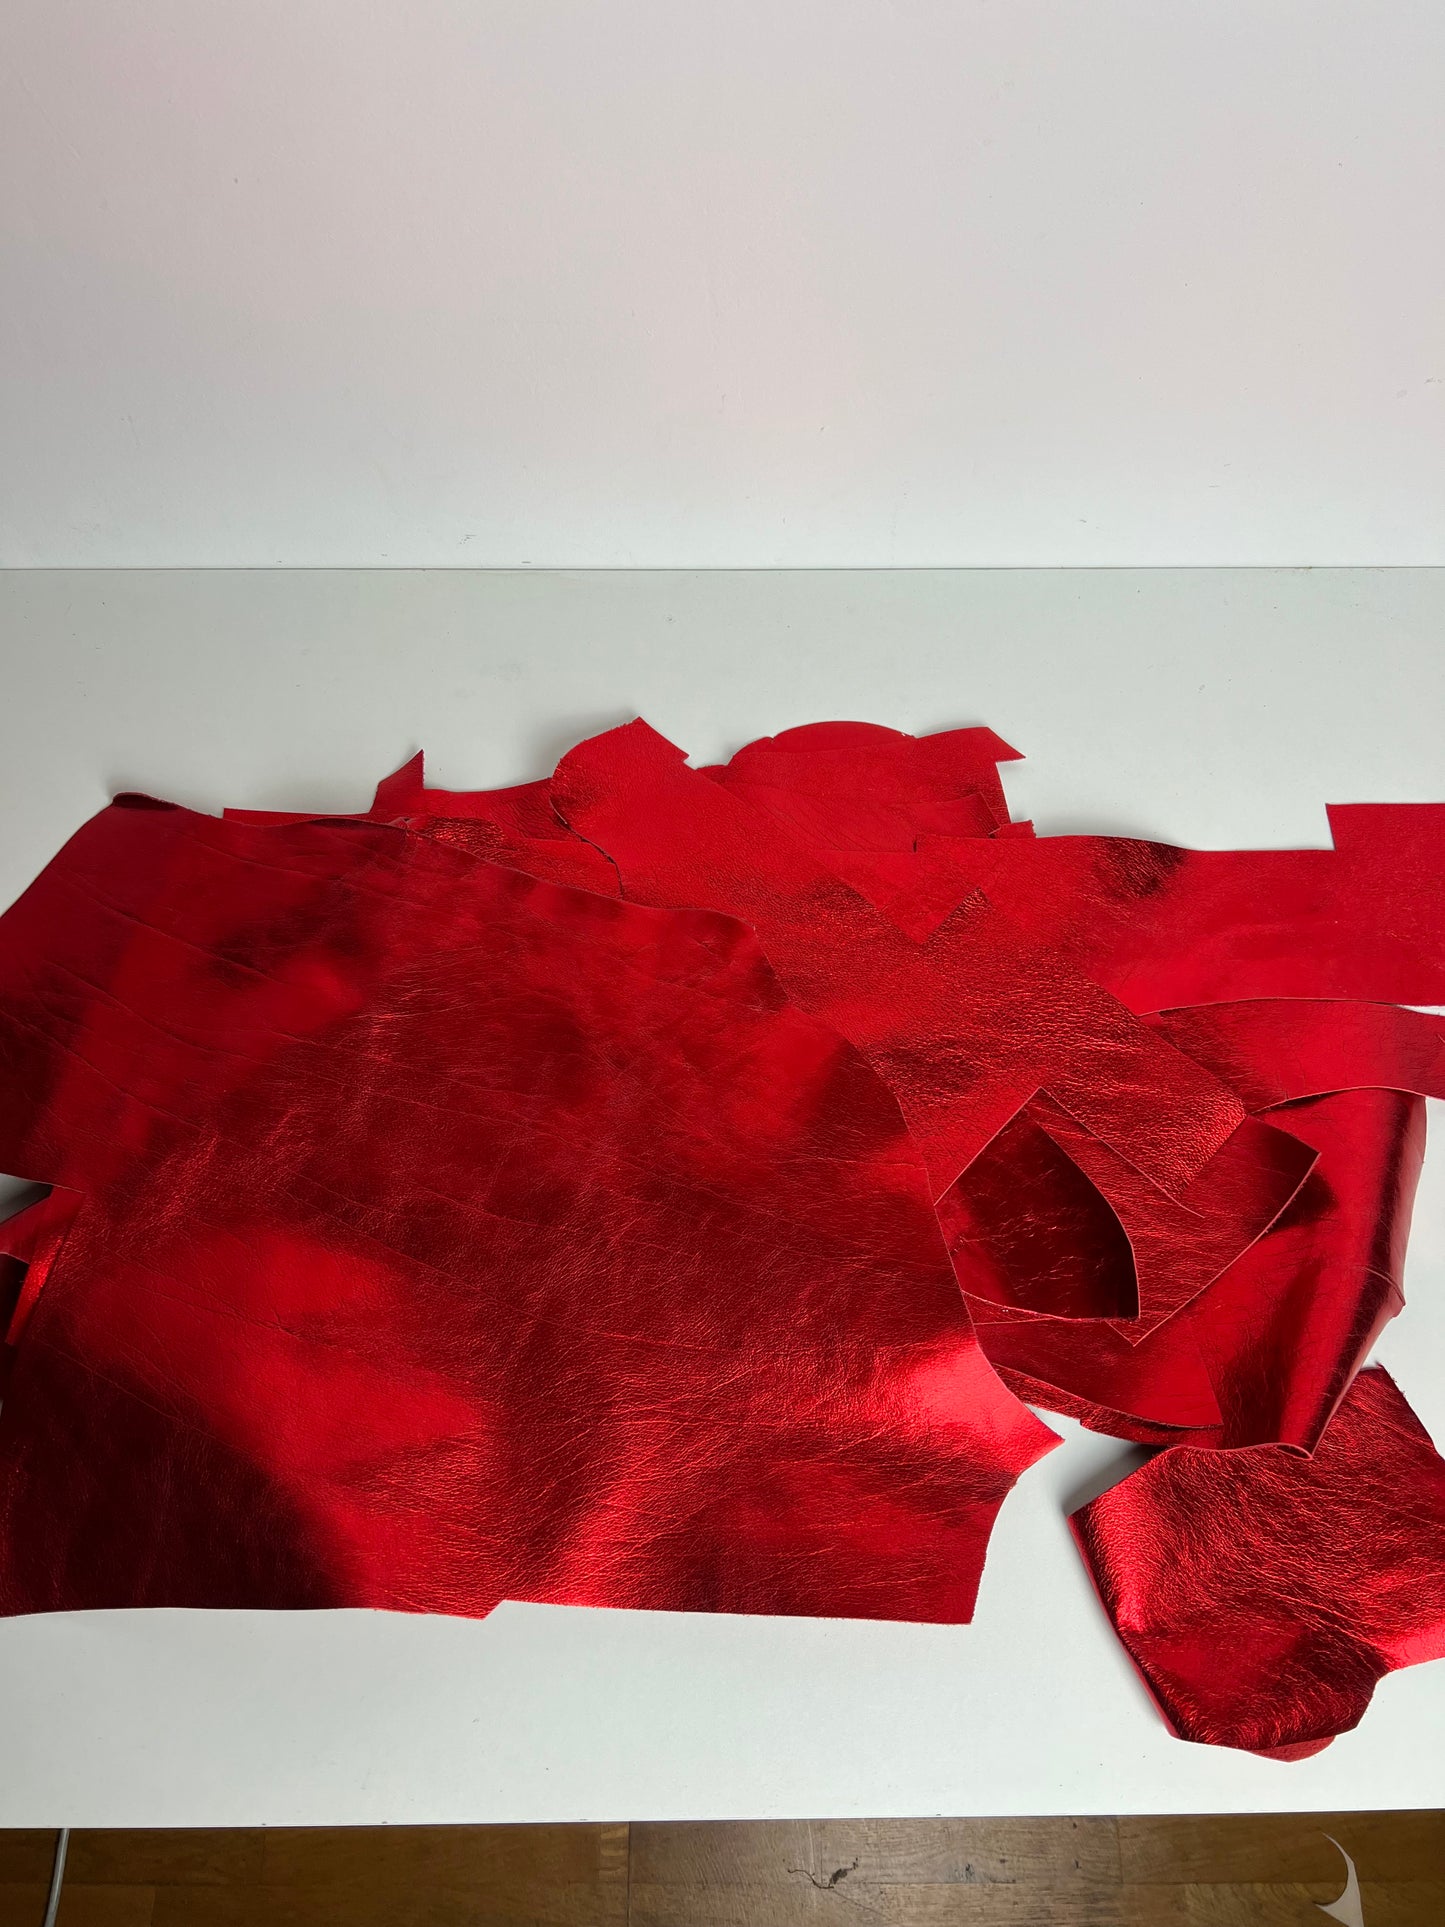 Pieces of Leather, Medium and Large pieces, Color bright red, Nice finish look | 0.8 kg  | 1.8 lb